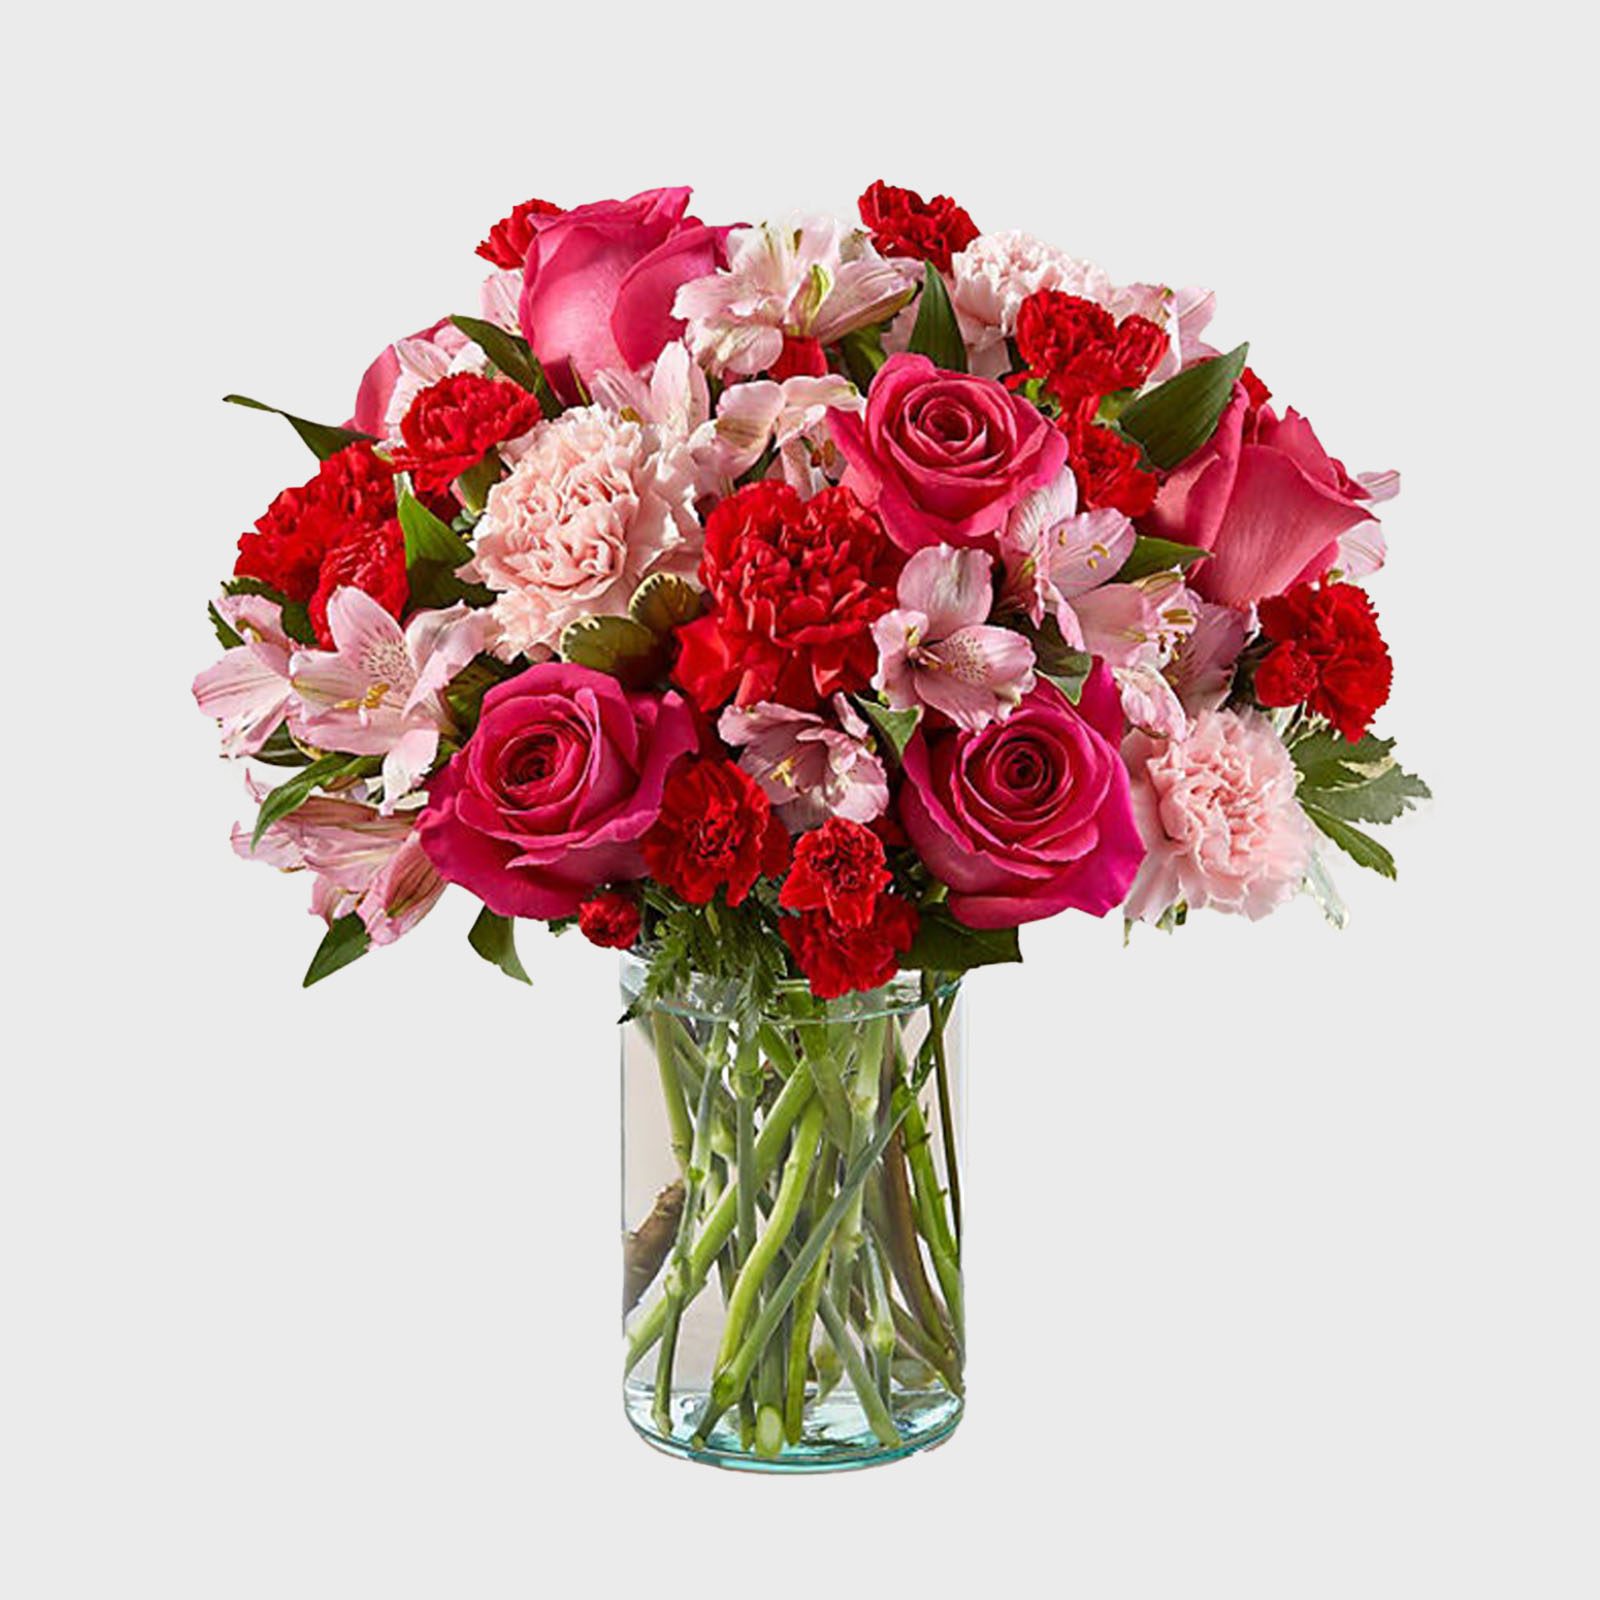 17 Rose Color Meanings to Help You Choose the Perfect Bouquet